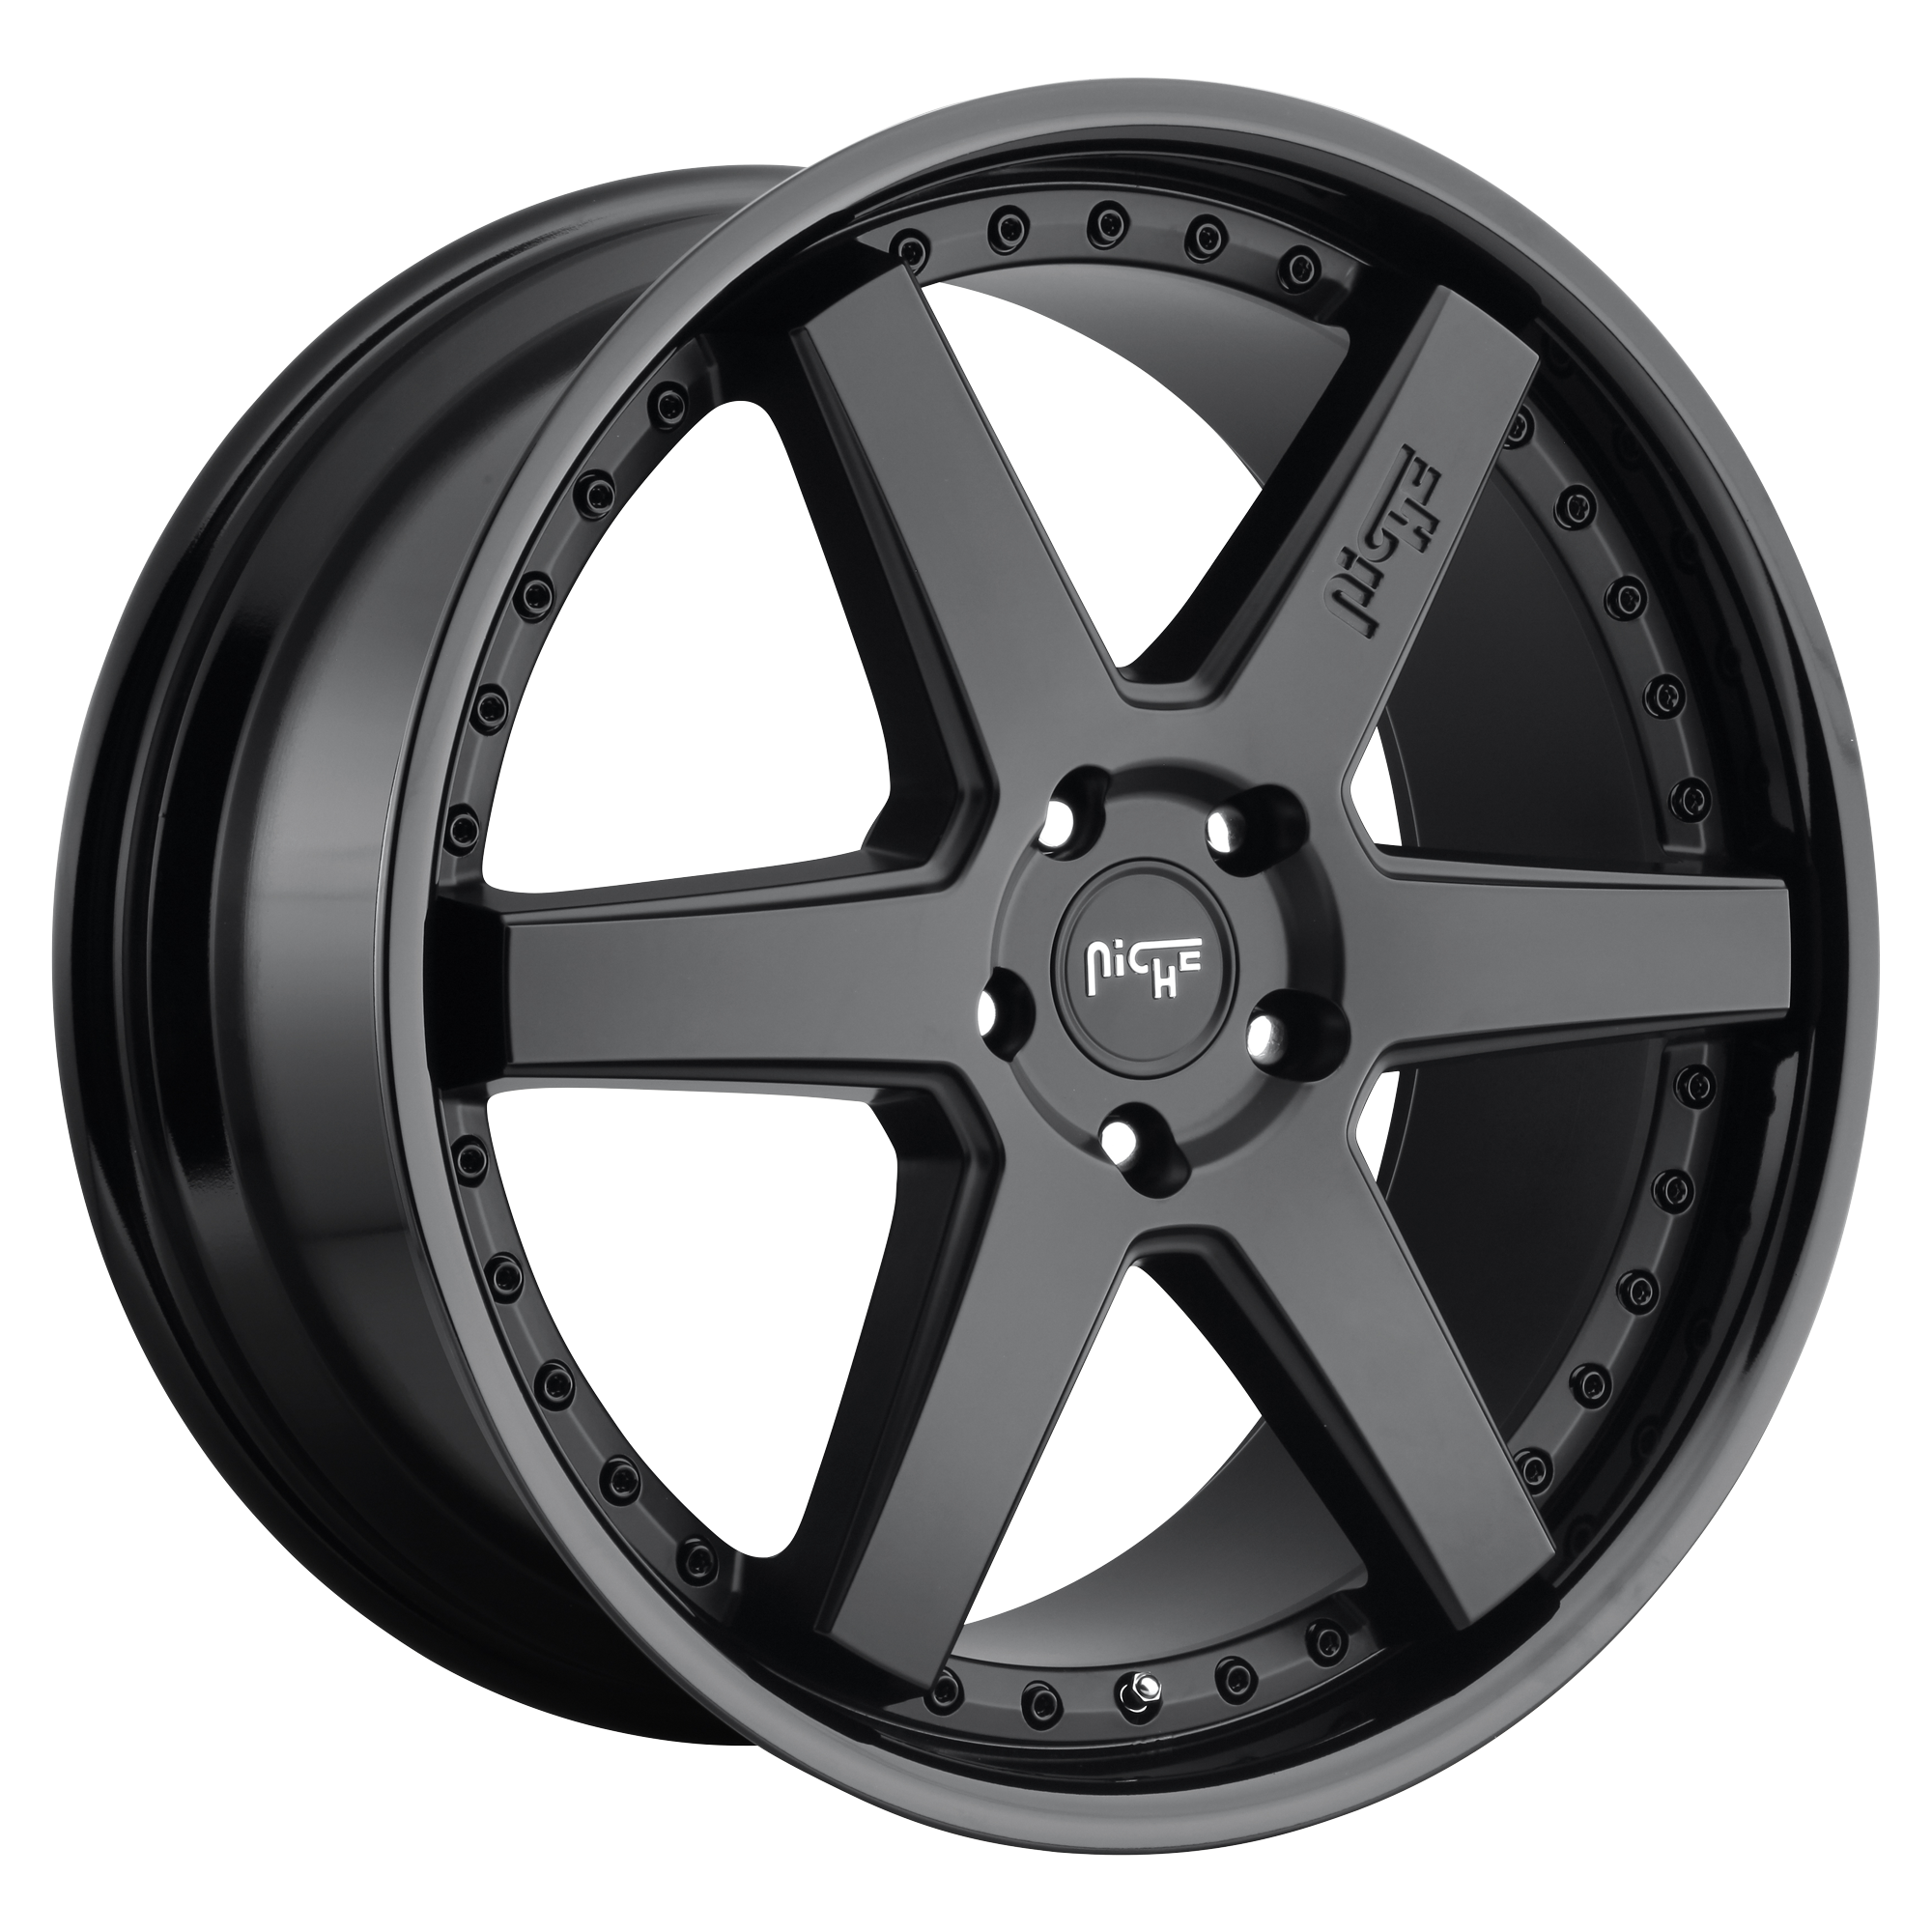 ALTAIR 19x8.5 5x112.00 GLOSS BLACK MATTE BLACK (42 mm) - Tires and Engine Performance